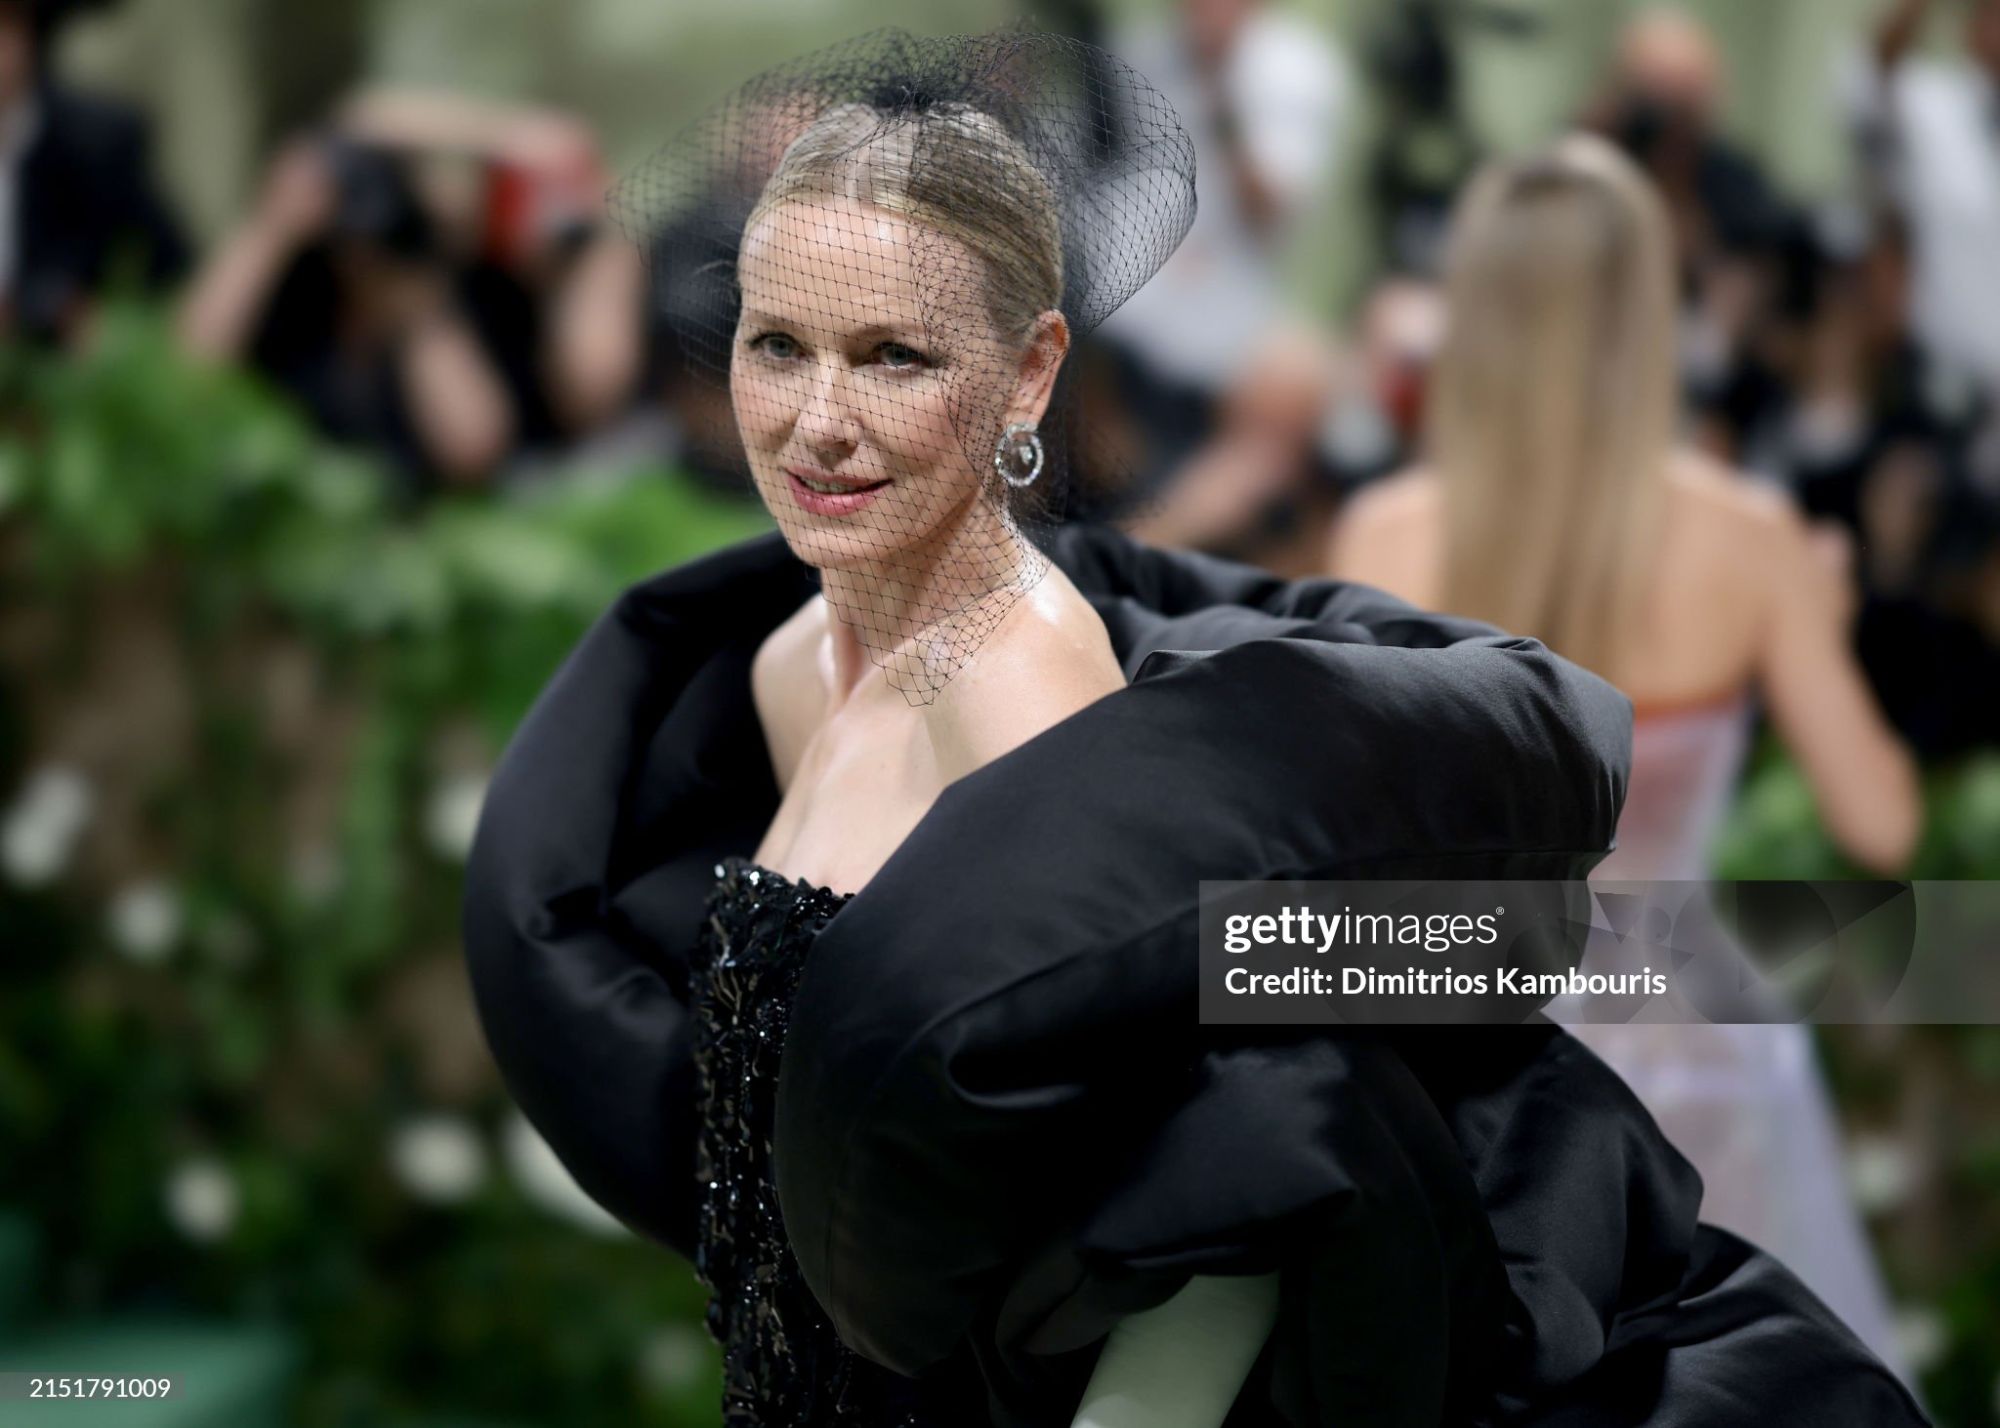 gettyimages-2151791009-2048x2048.jpg